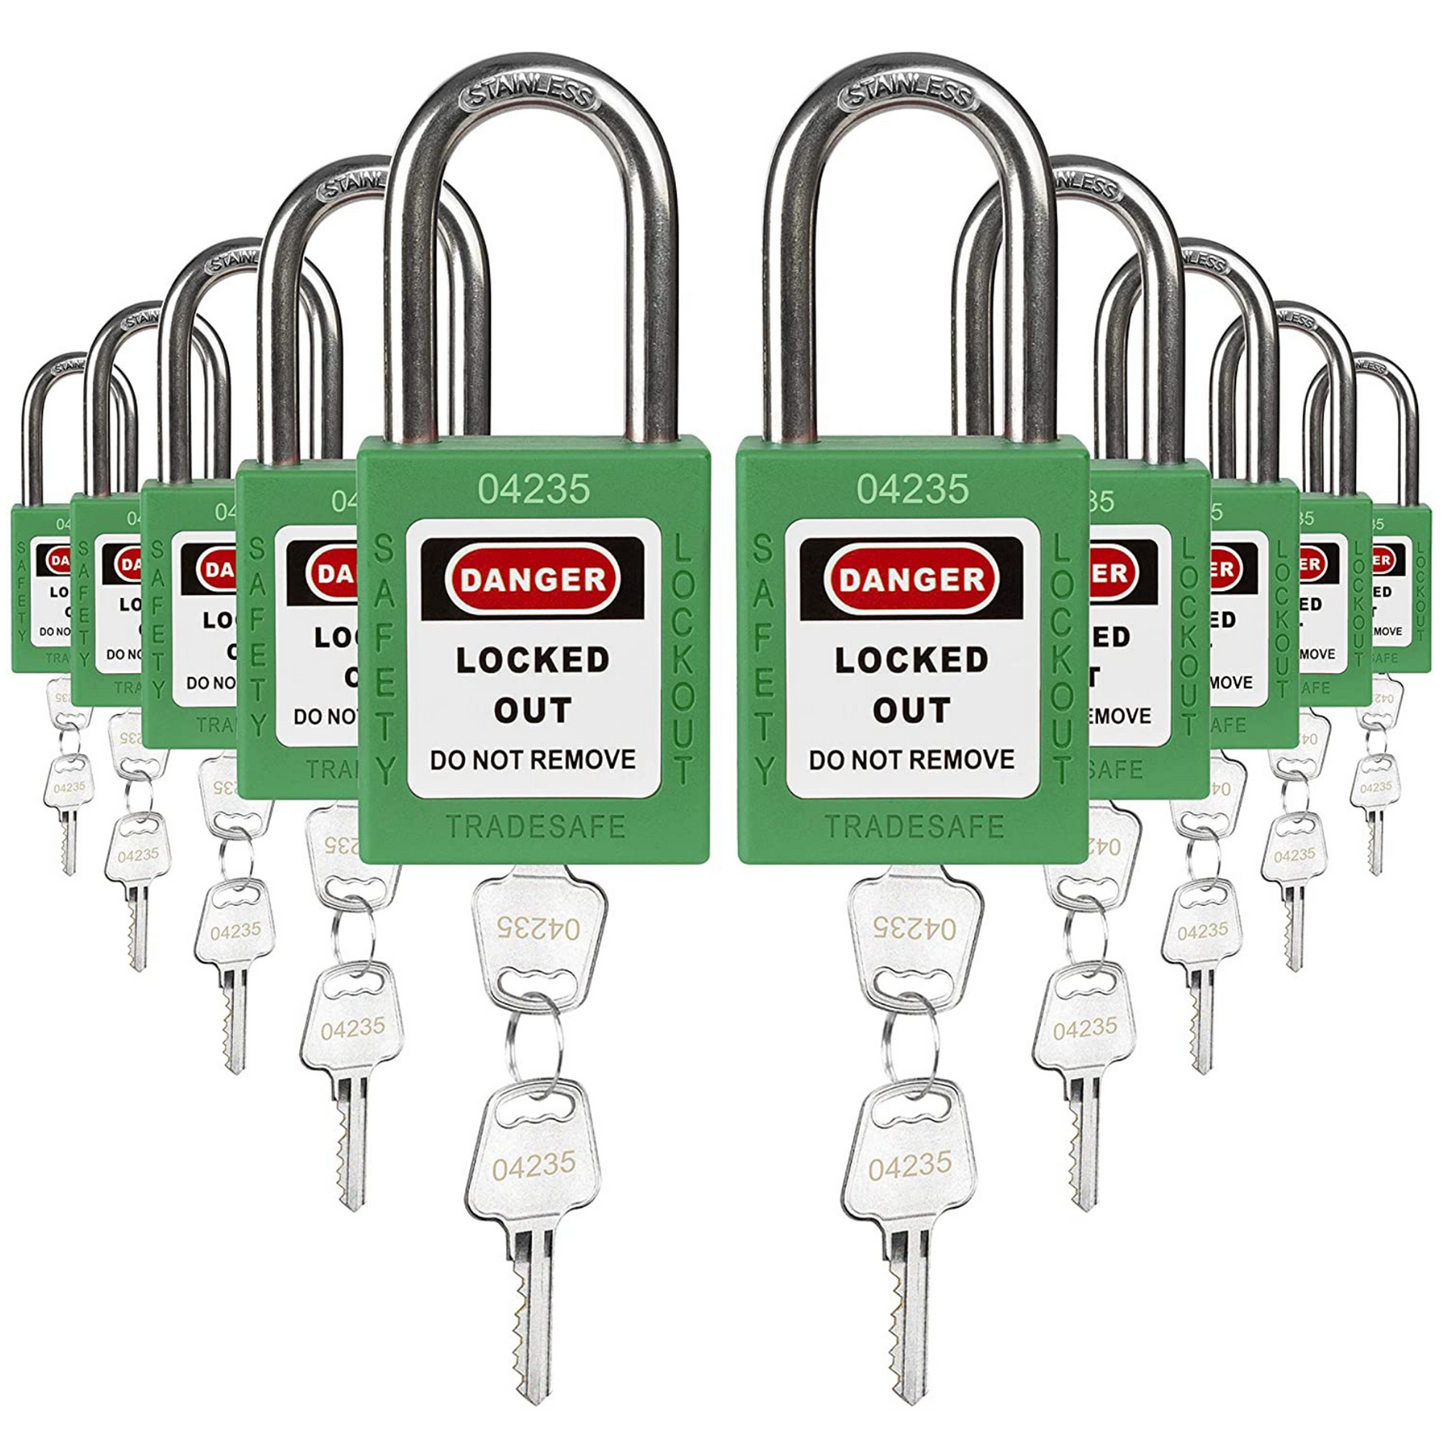 ten green loto padlocks, each with two keys and a uniform five-number code on both the lock body and the keys 